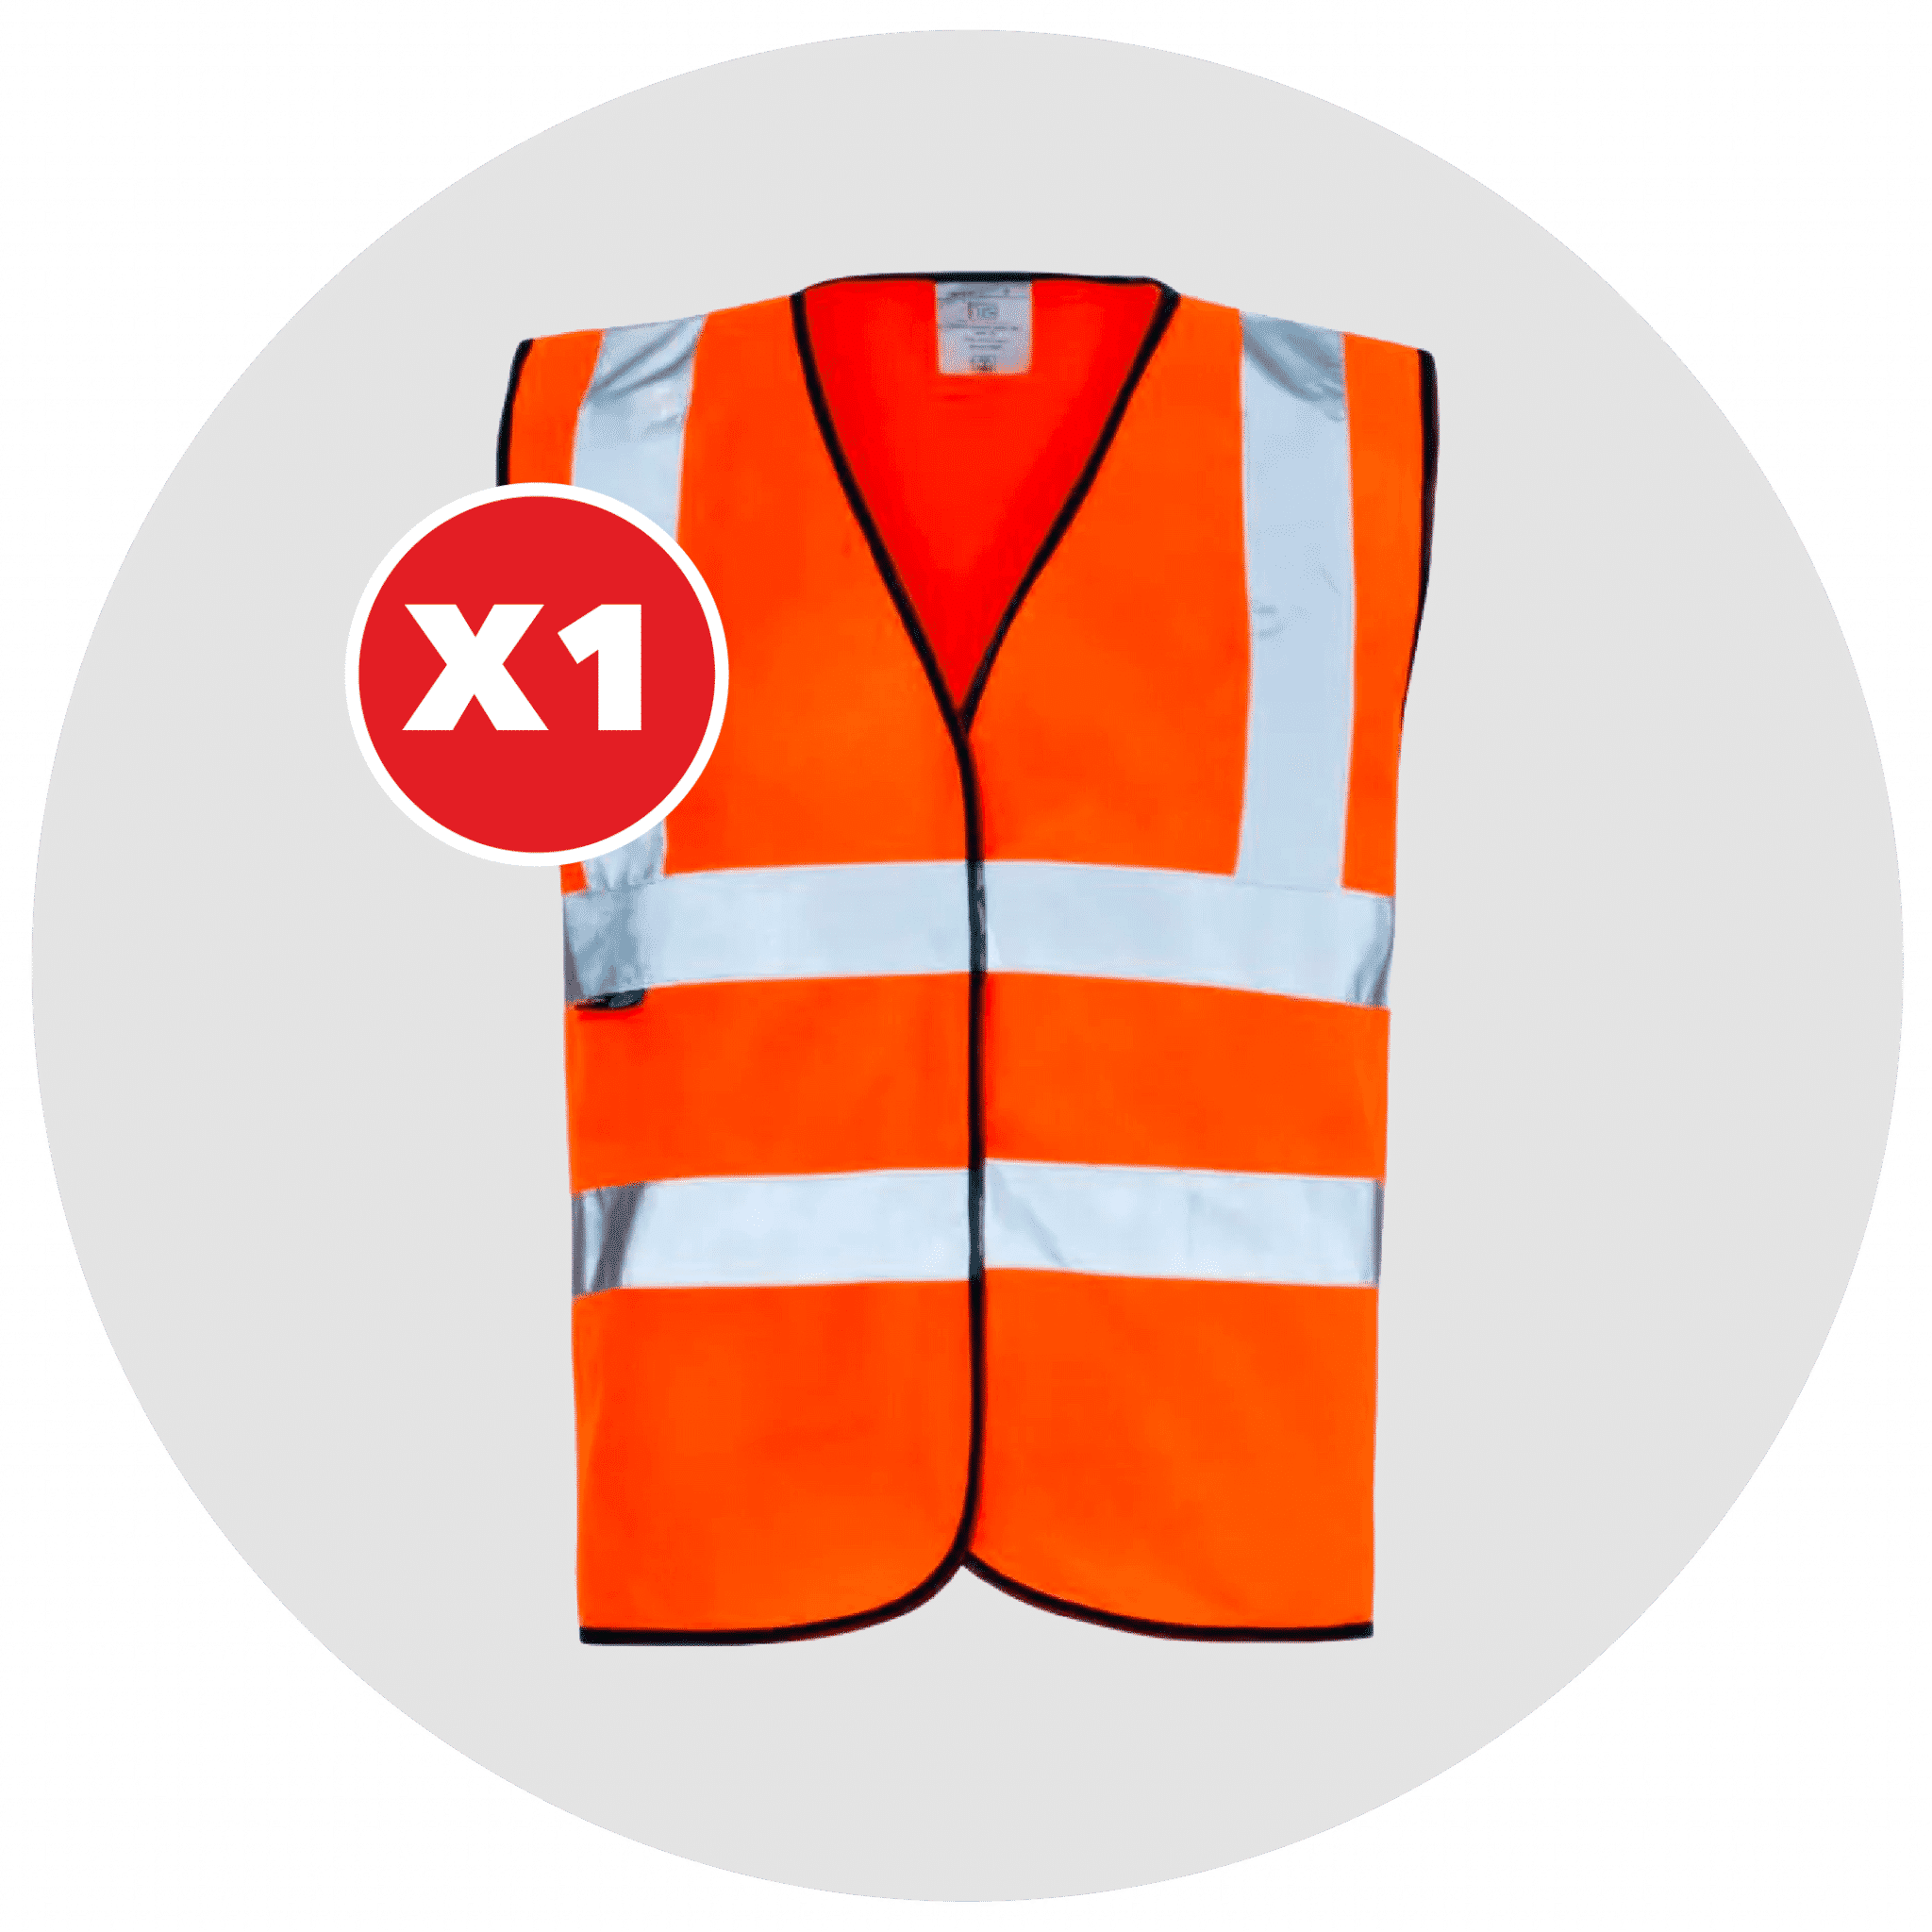 Build Your Own Bundle  Quality Workwear, at the right price.